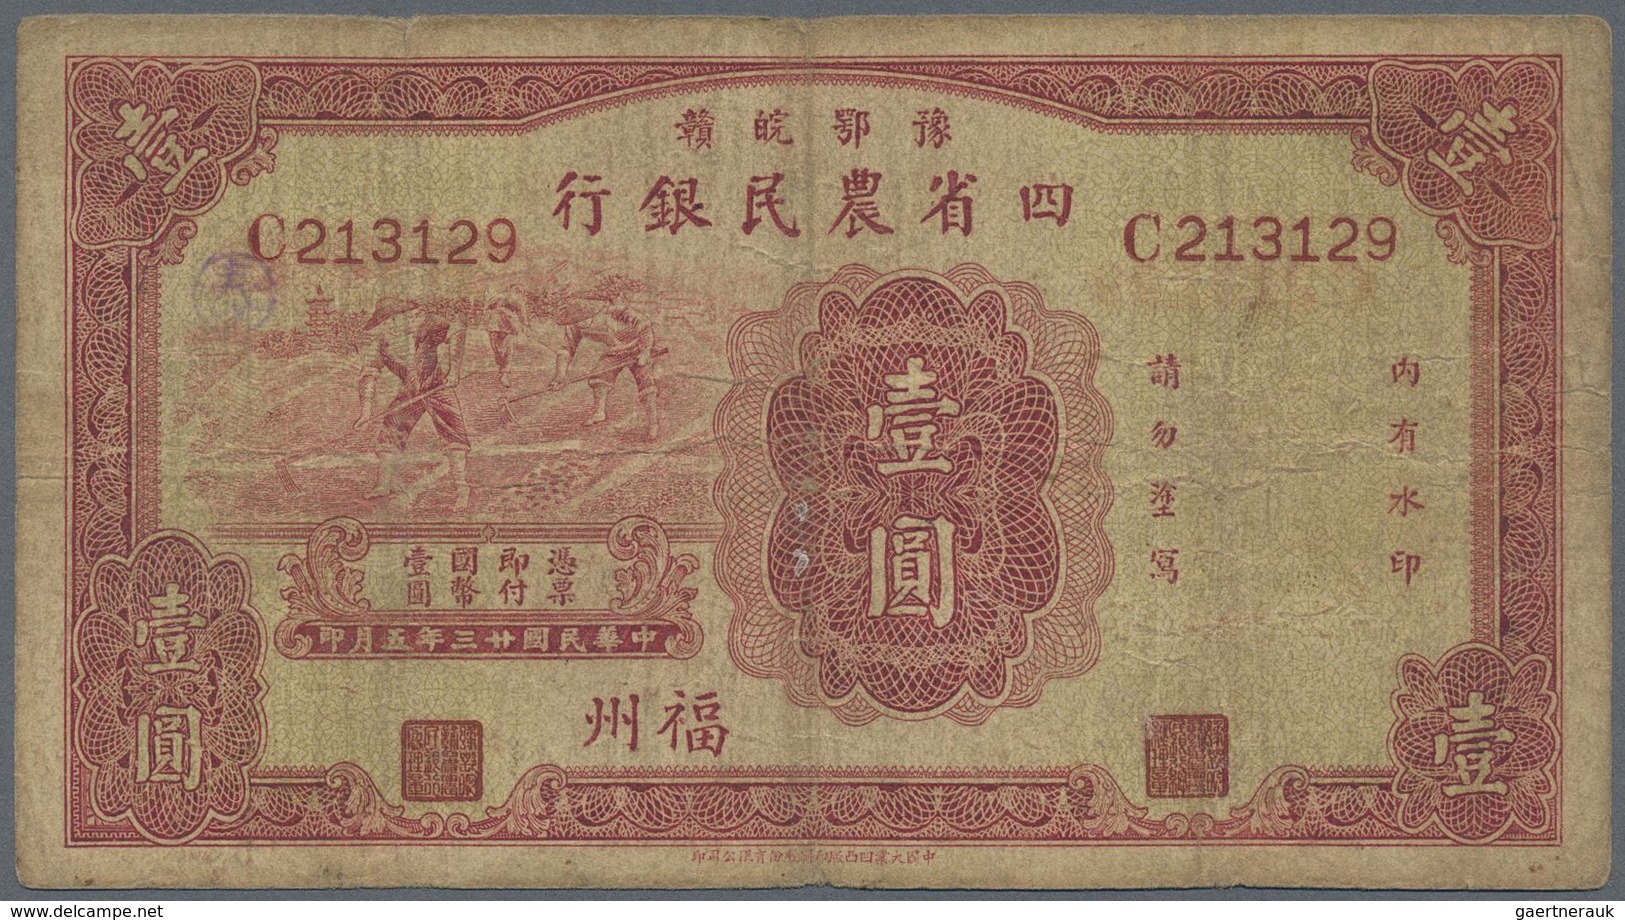 China: Agricultural Bank Of The Four Provinces 1 Yuan 1934 P. A91Ea, Used With Folds And Creases, St - China